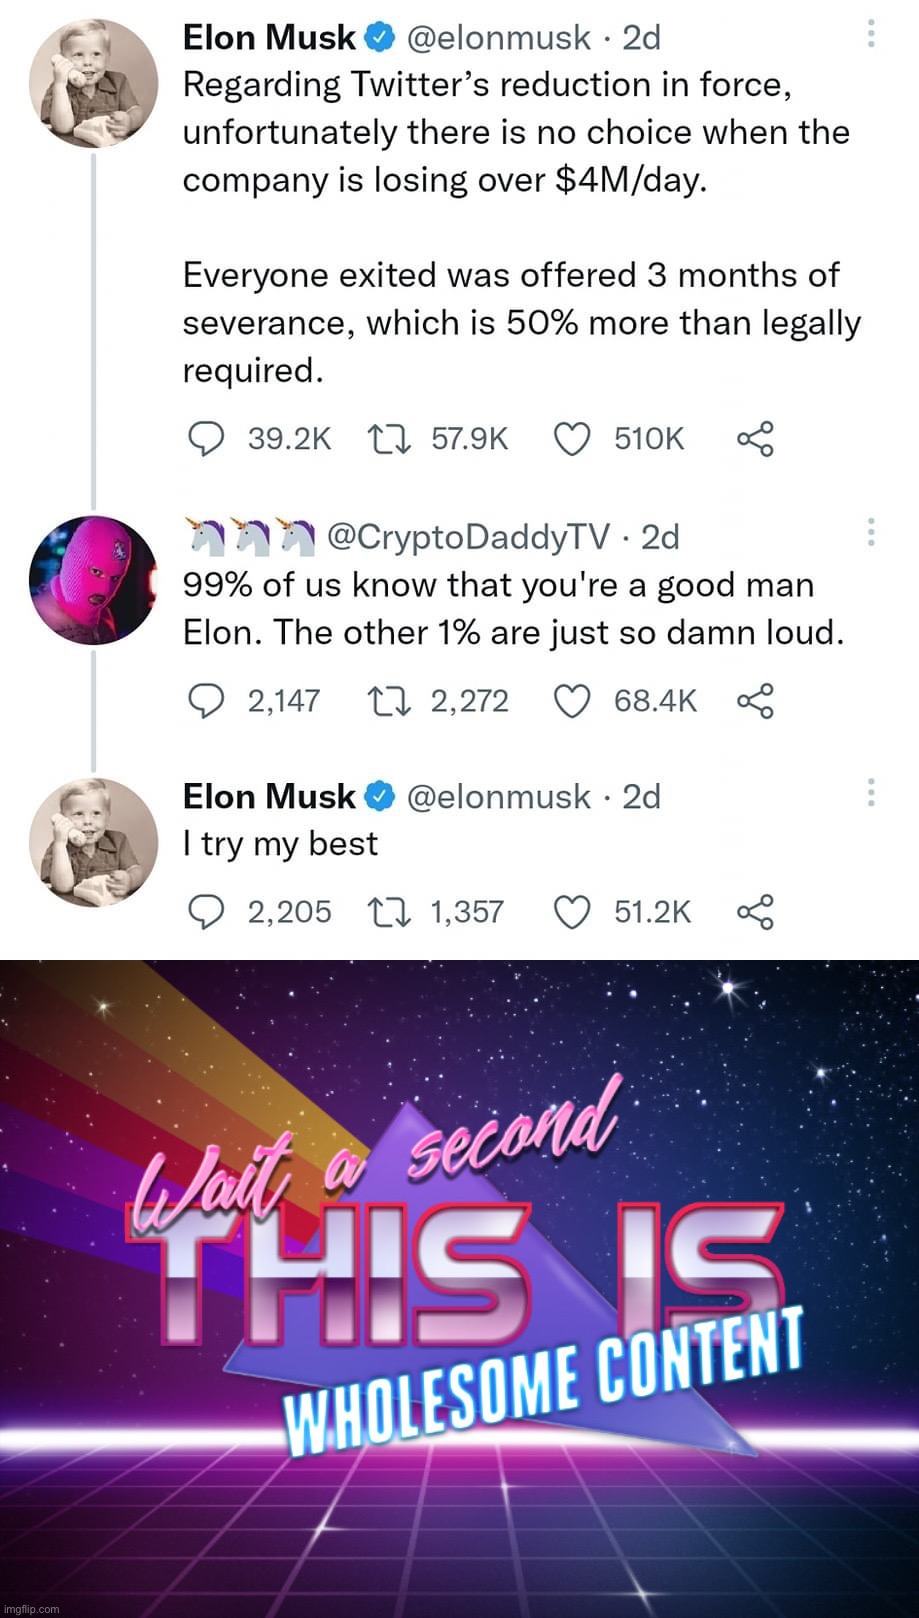 Counterpoint: Elon is a relatable guy, just trying to find his path in life while making mistakes, like all of us. Muskophilia | image tagged in elon musk relatable,wait a second this is wholesome content,twitter,elon musk,wholesome,muskophilia | made w/ Imgflip meme maker